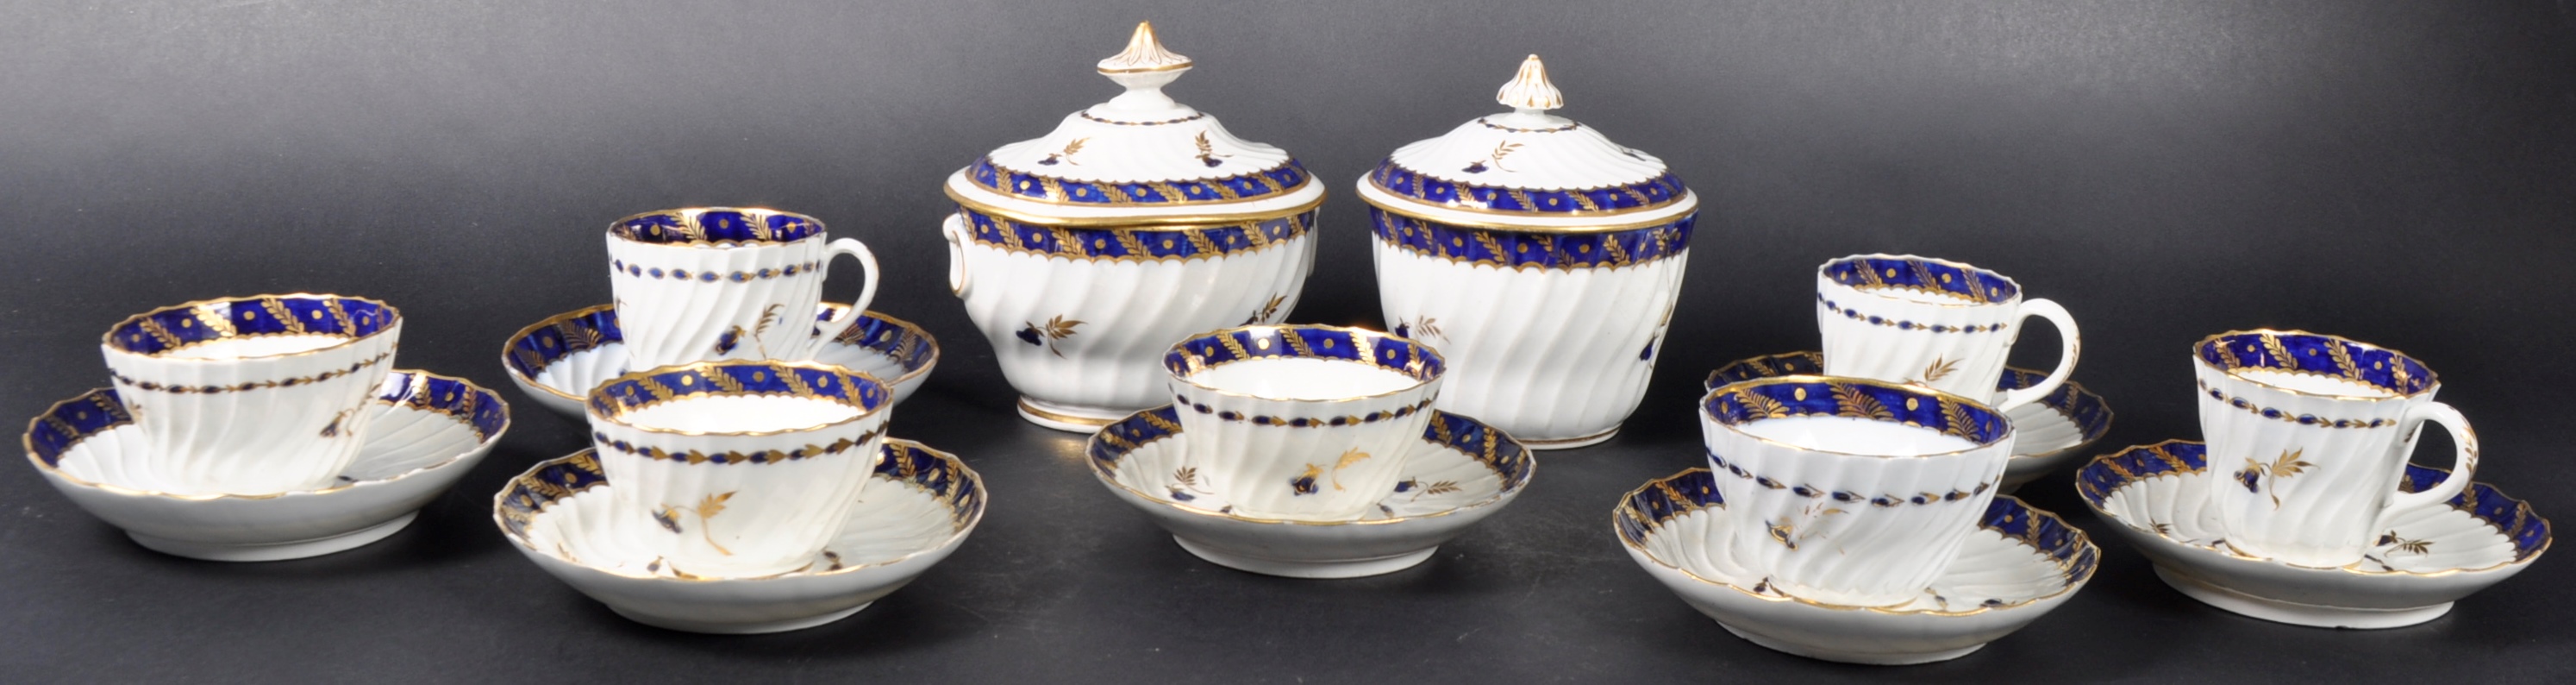 SMALL COLLECTION OF 18TH CENTURY WORCESTER CHINA TABLE WARES - Image 2 of 10